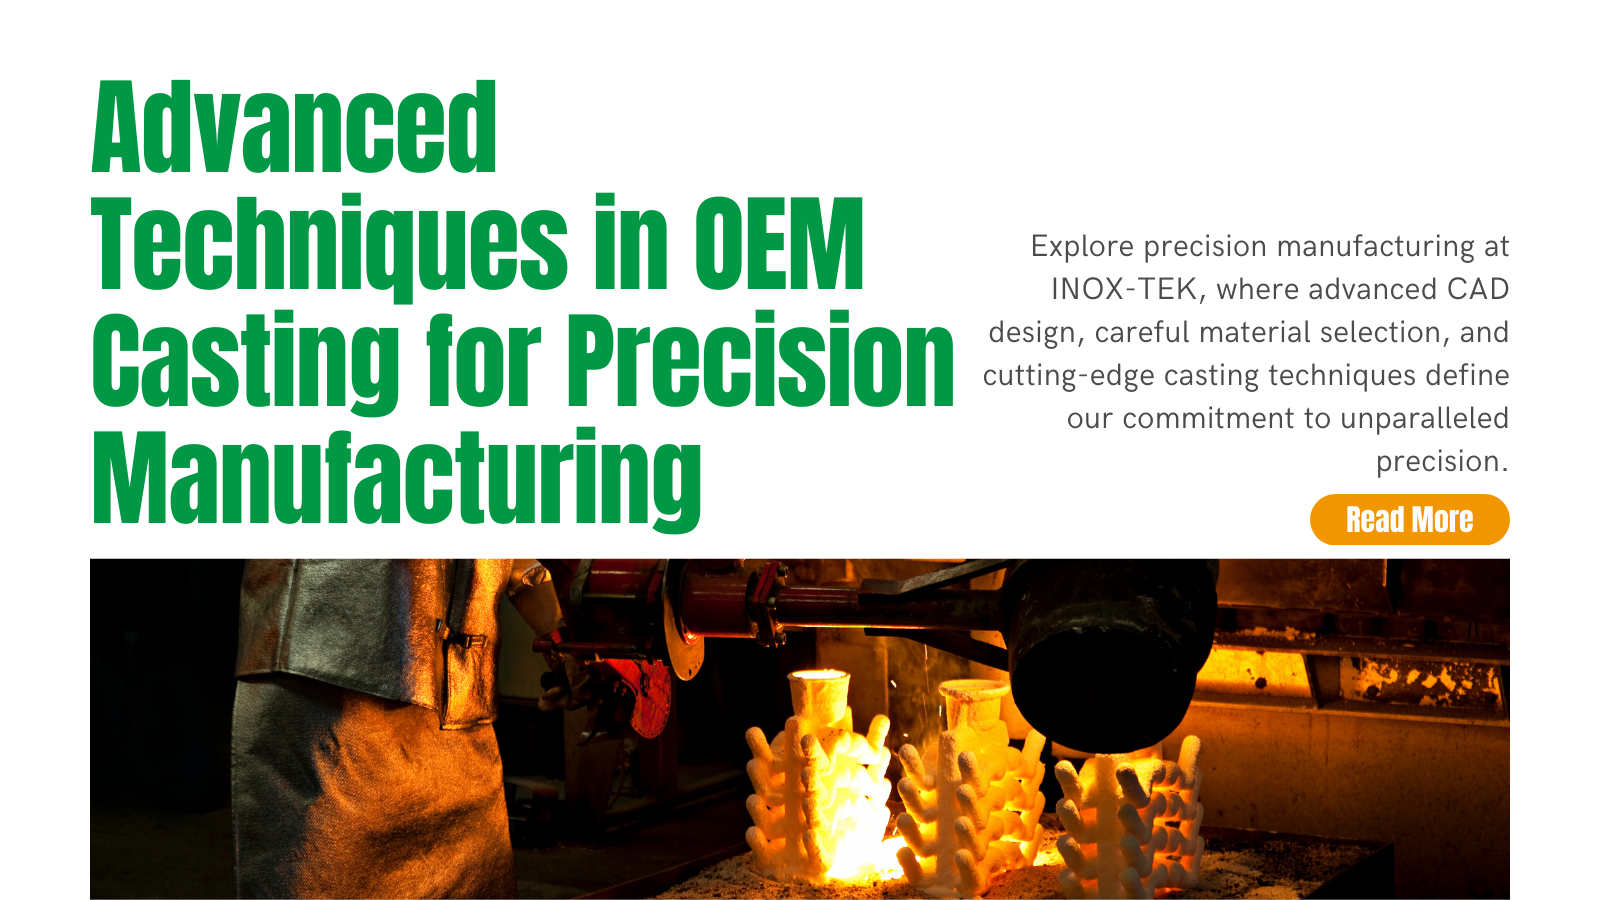 Advanced Techniques in OEM Casting for Precision Manufacturing | INOX-TEK